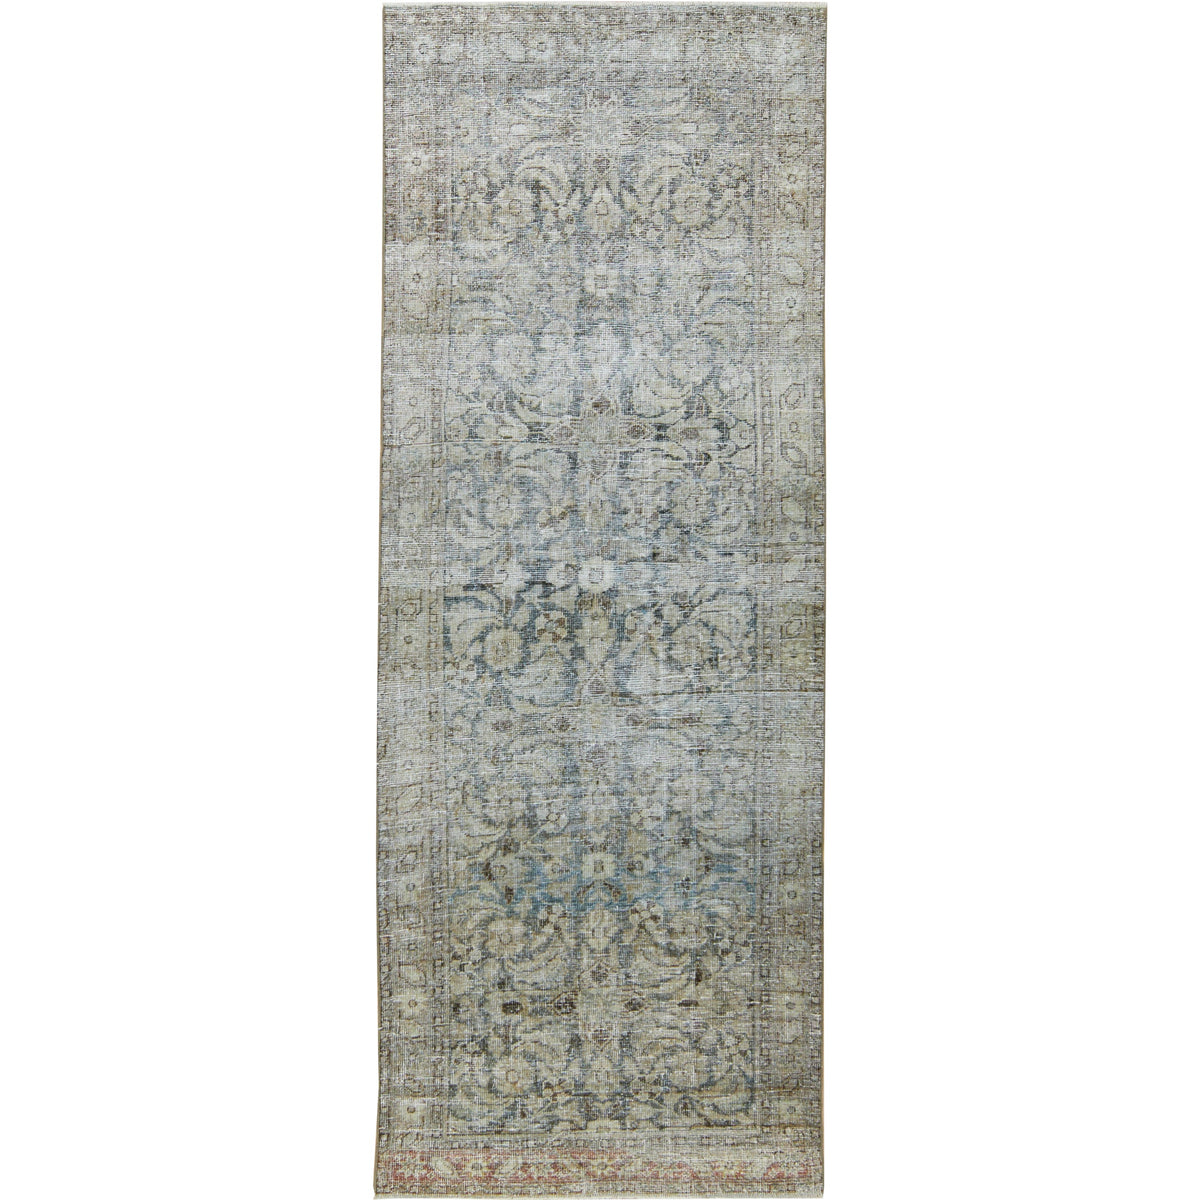 Rinatya - The Brown Tapestry of Persian Legacy | Kuden Rugs